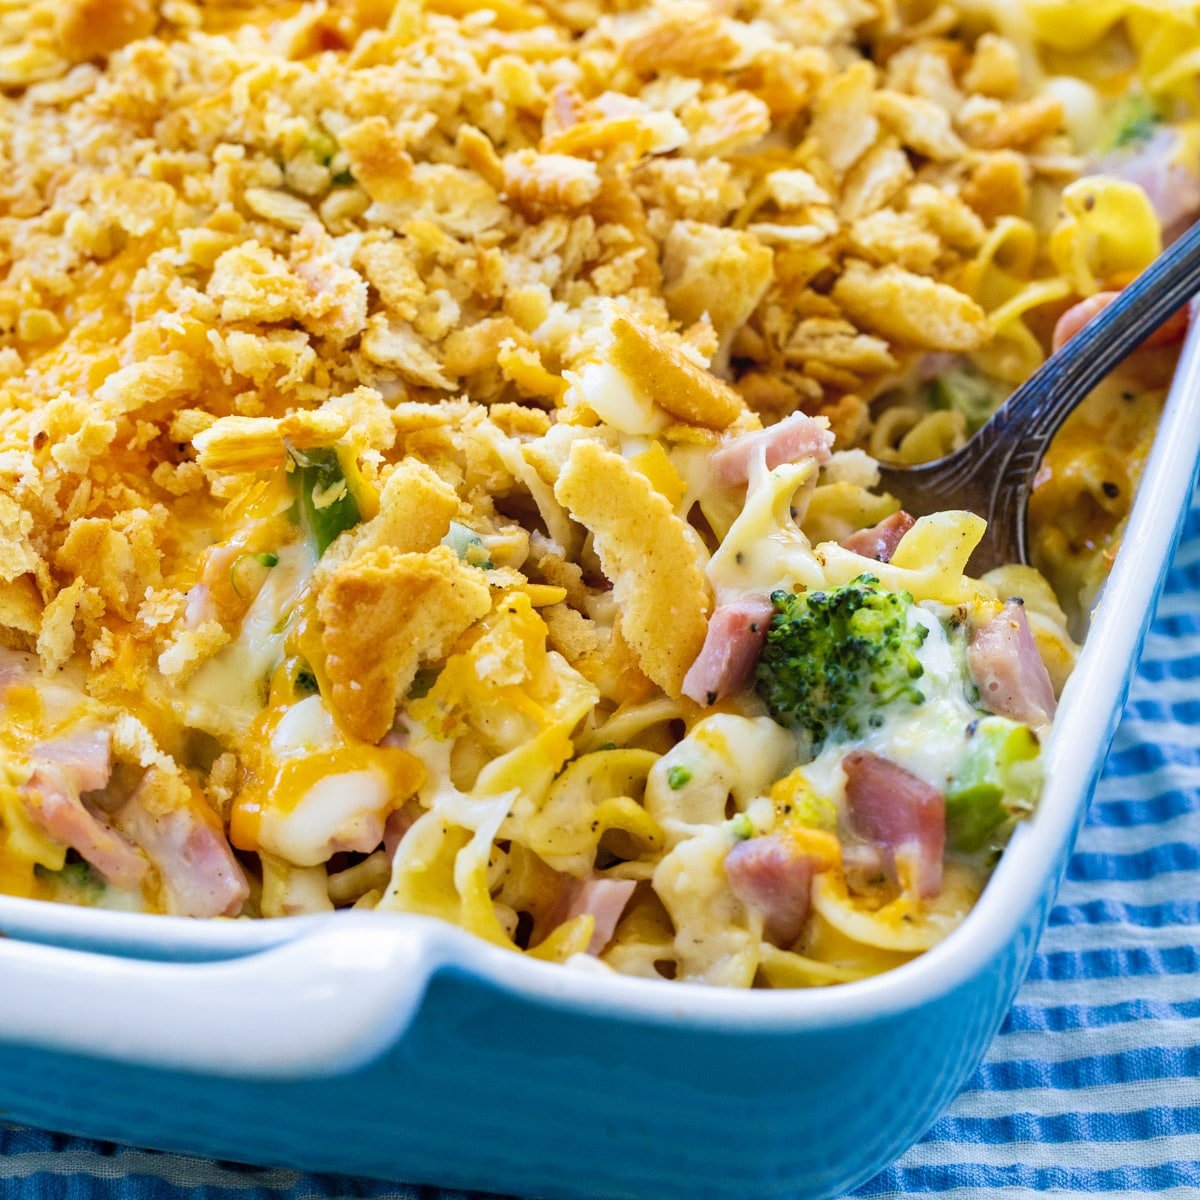 Spoon scooping up Ham and Noodle Casserole with Broccoli.